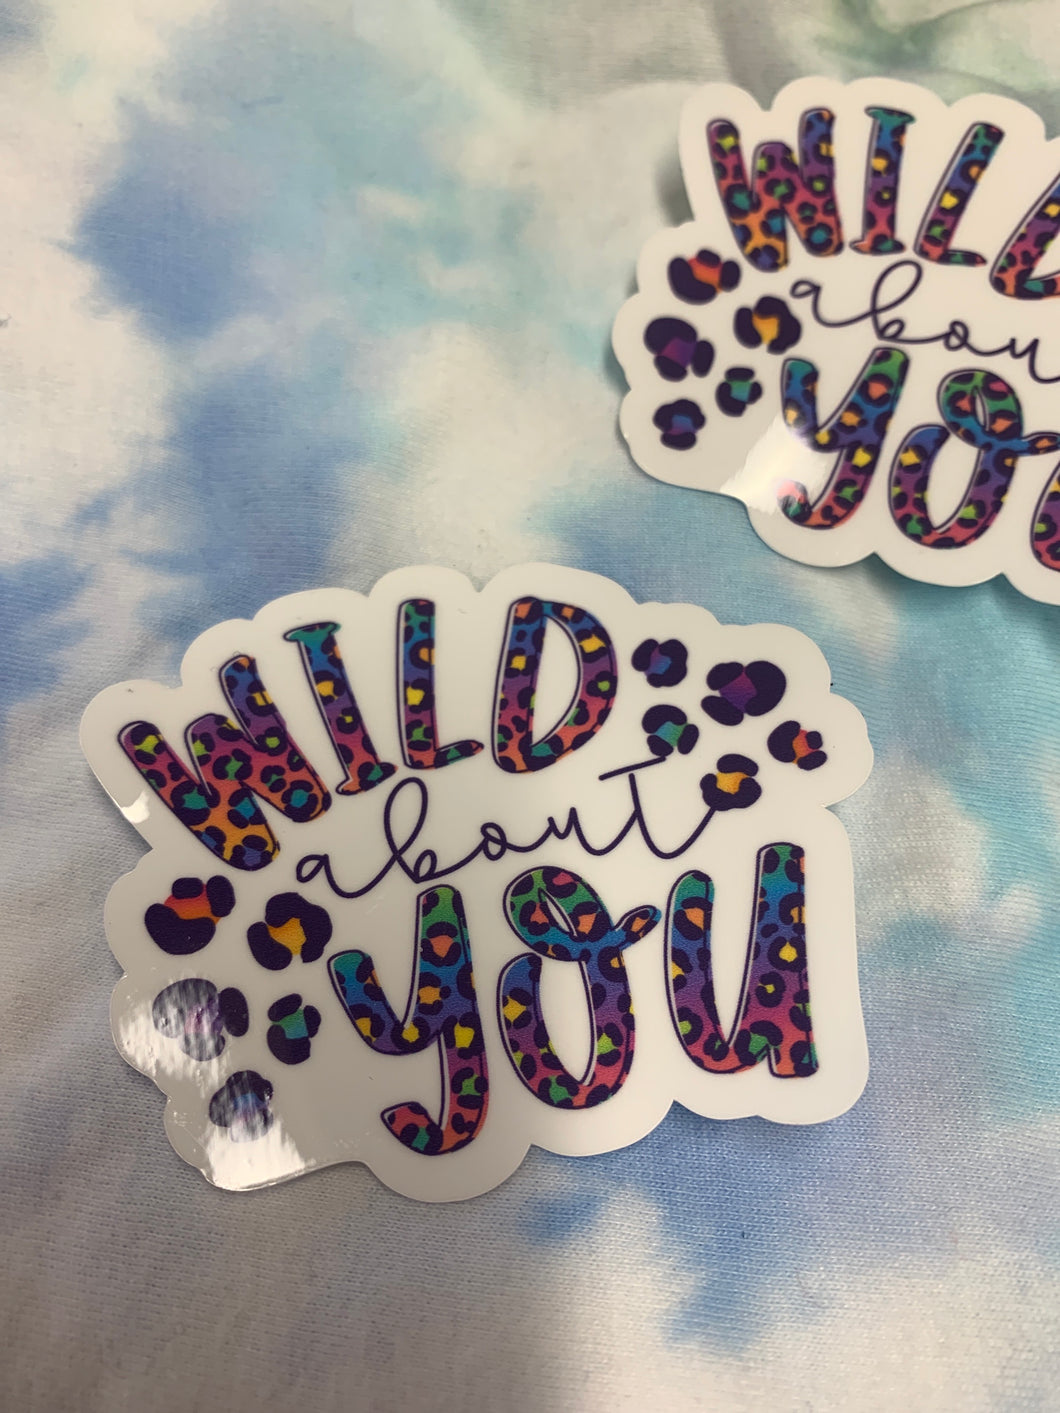 Vinyl sticker wild about you free shipping - Main glitter site 